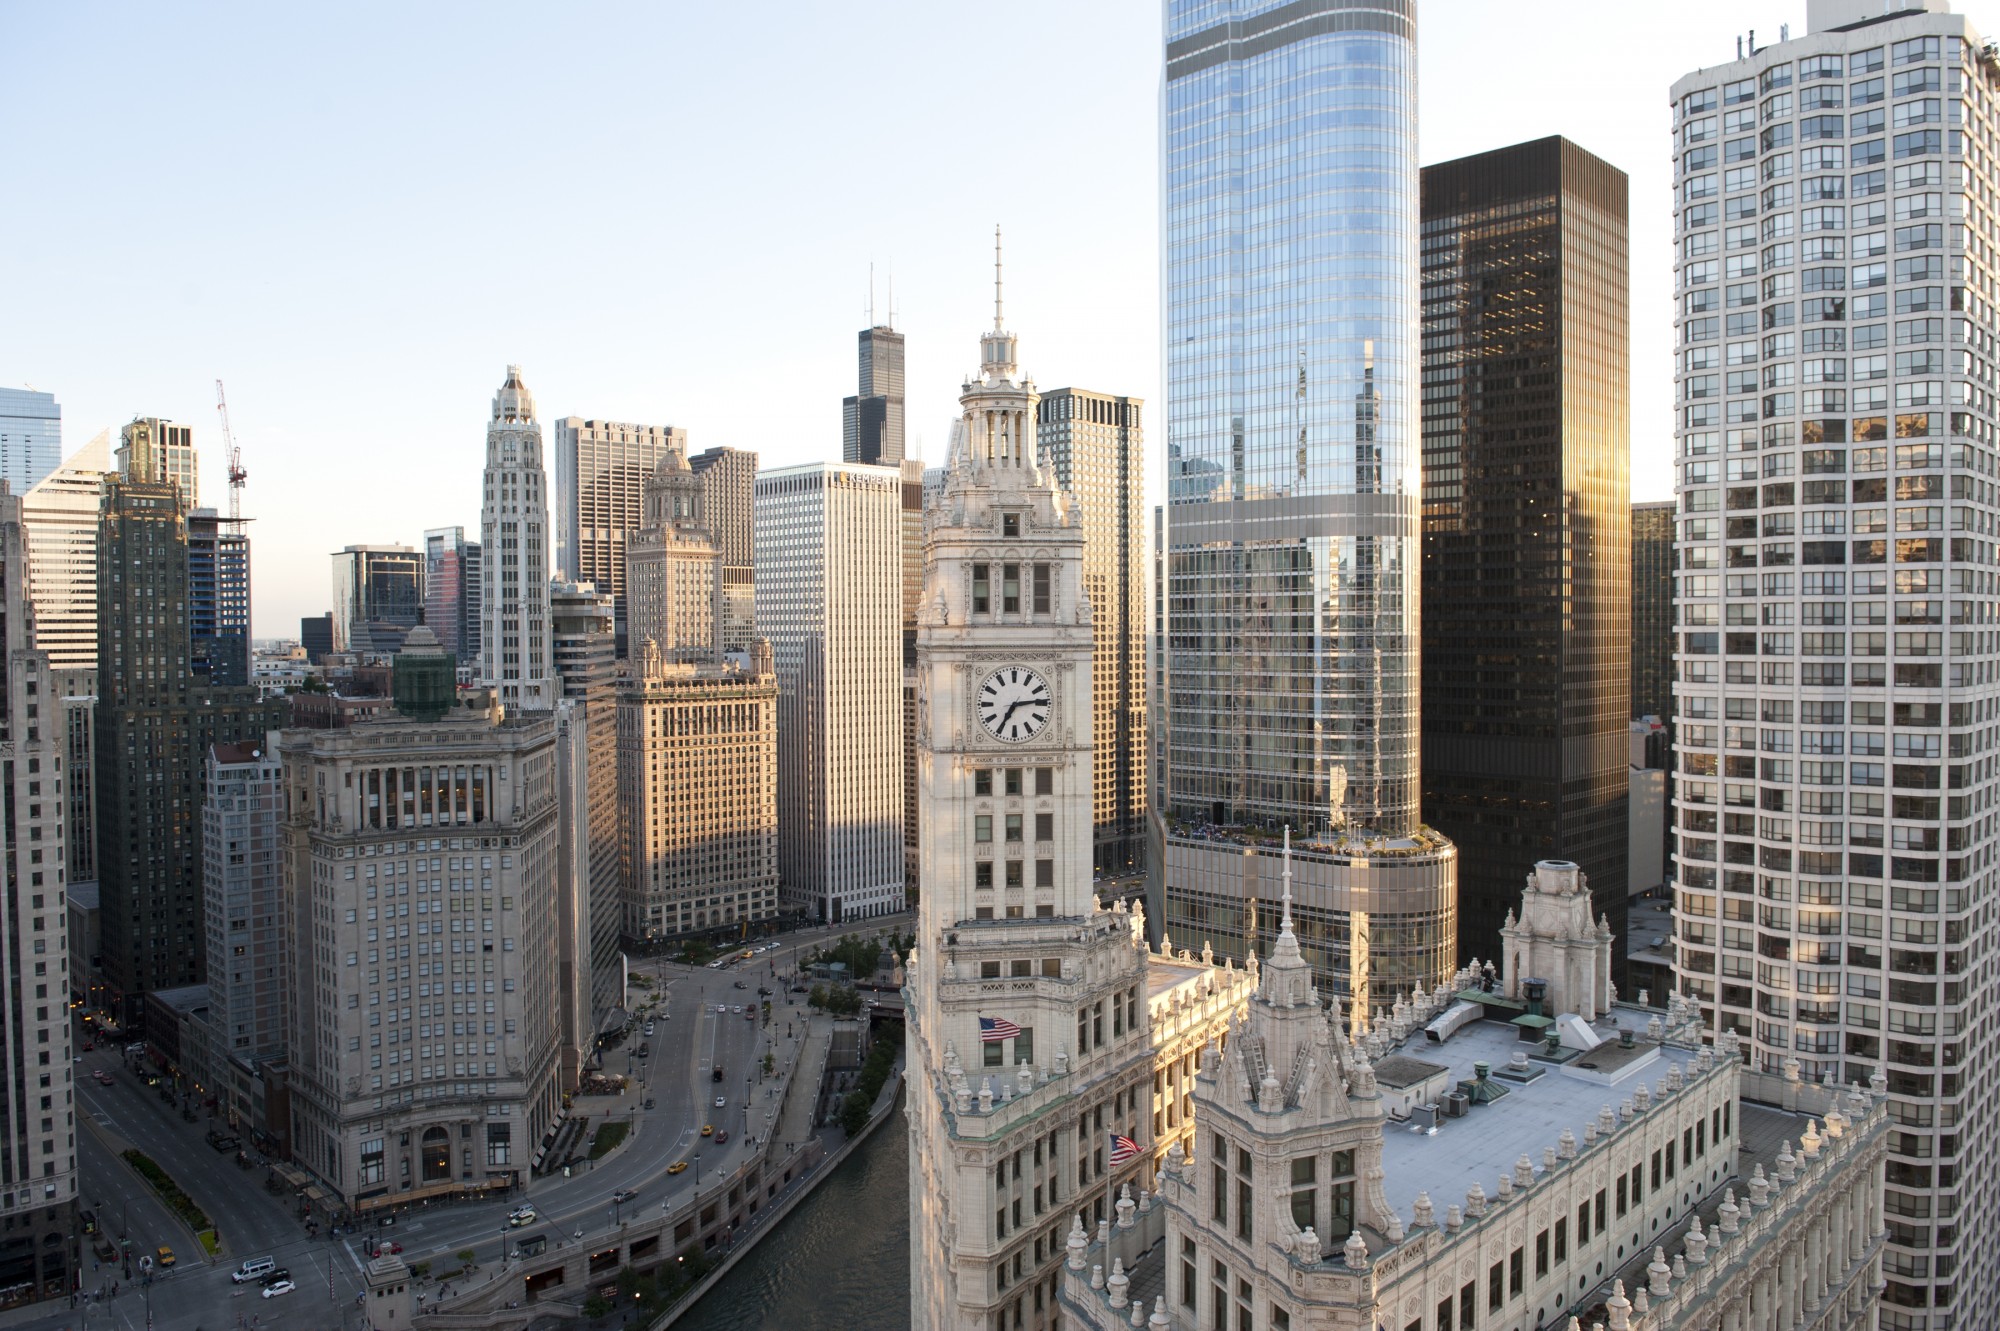 Wrigley Building · Buildings of Chicago · Chicago Architecture ...